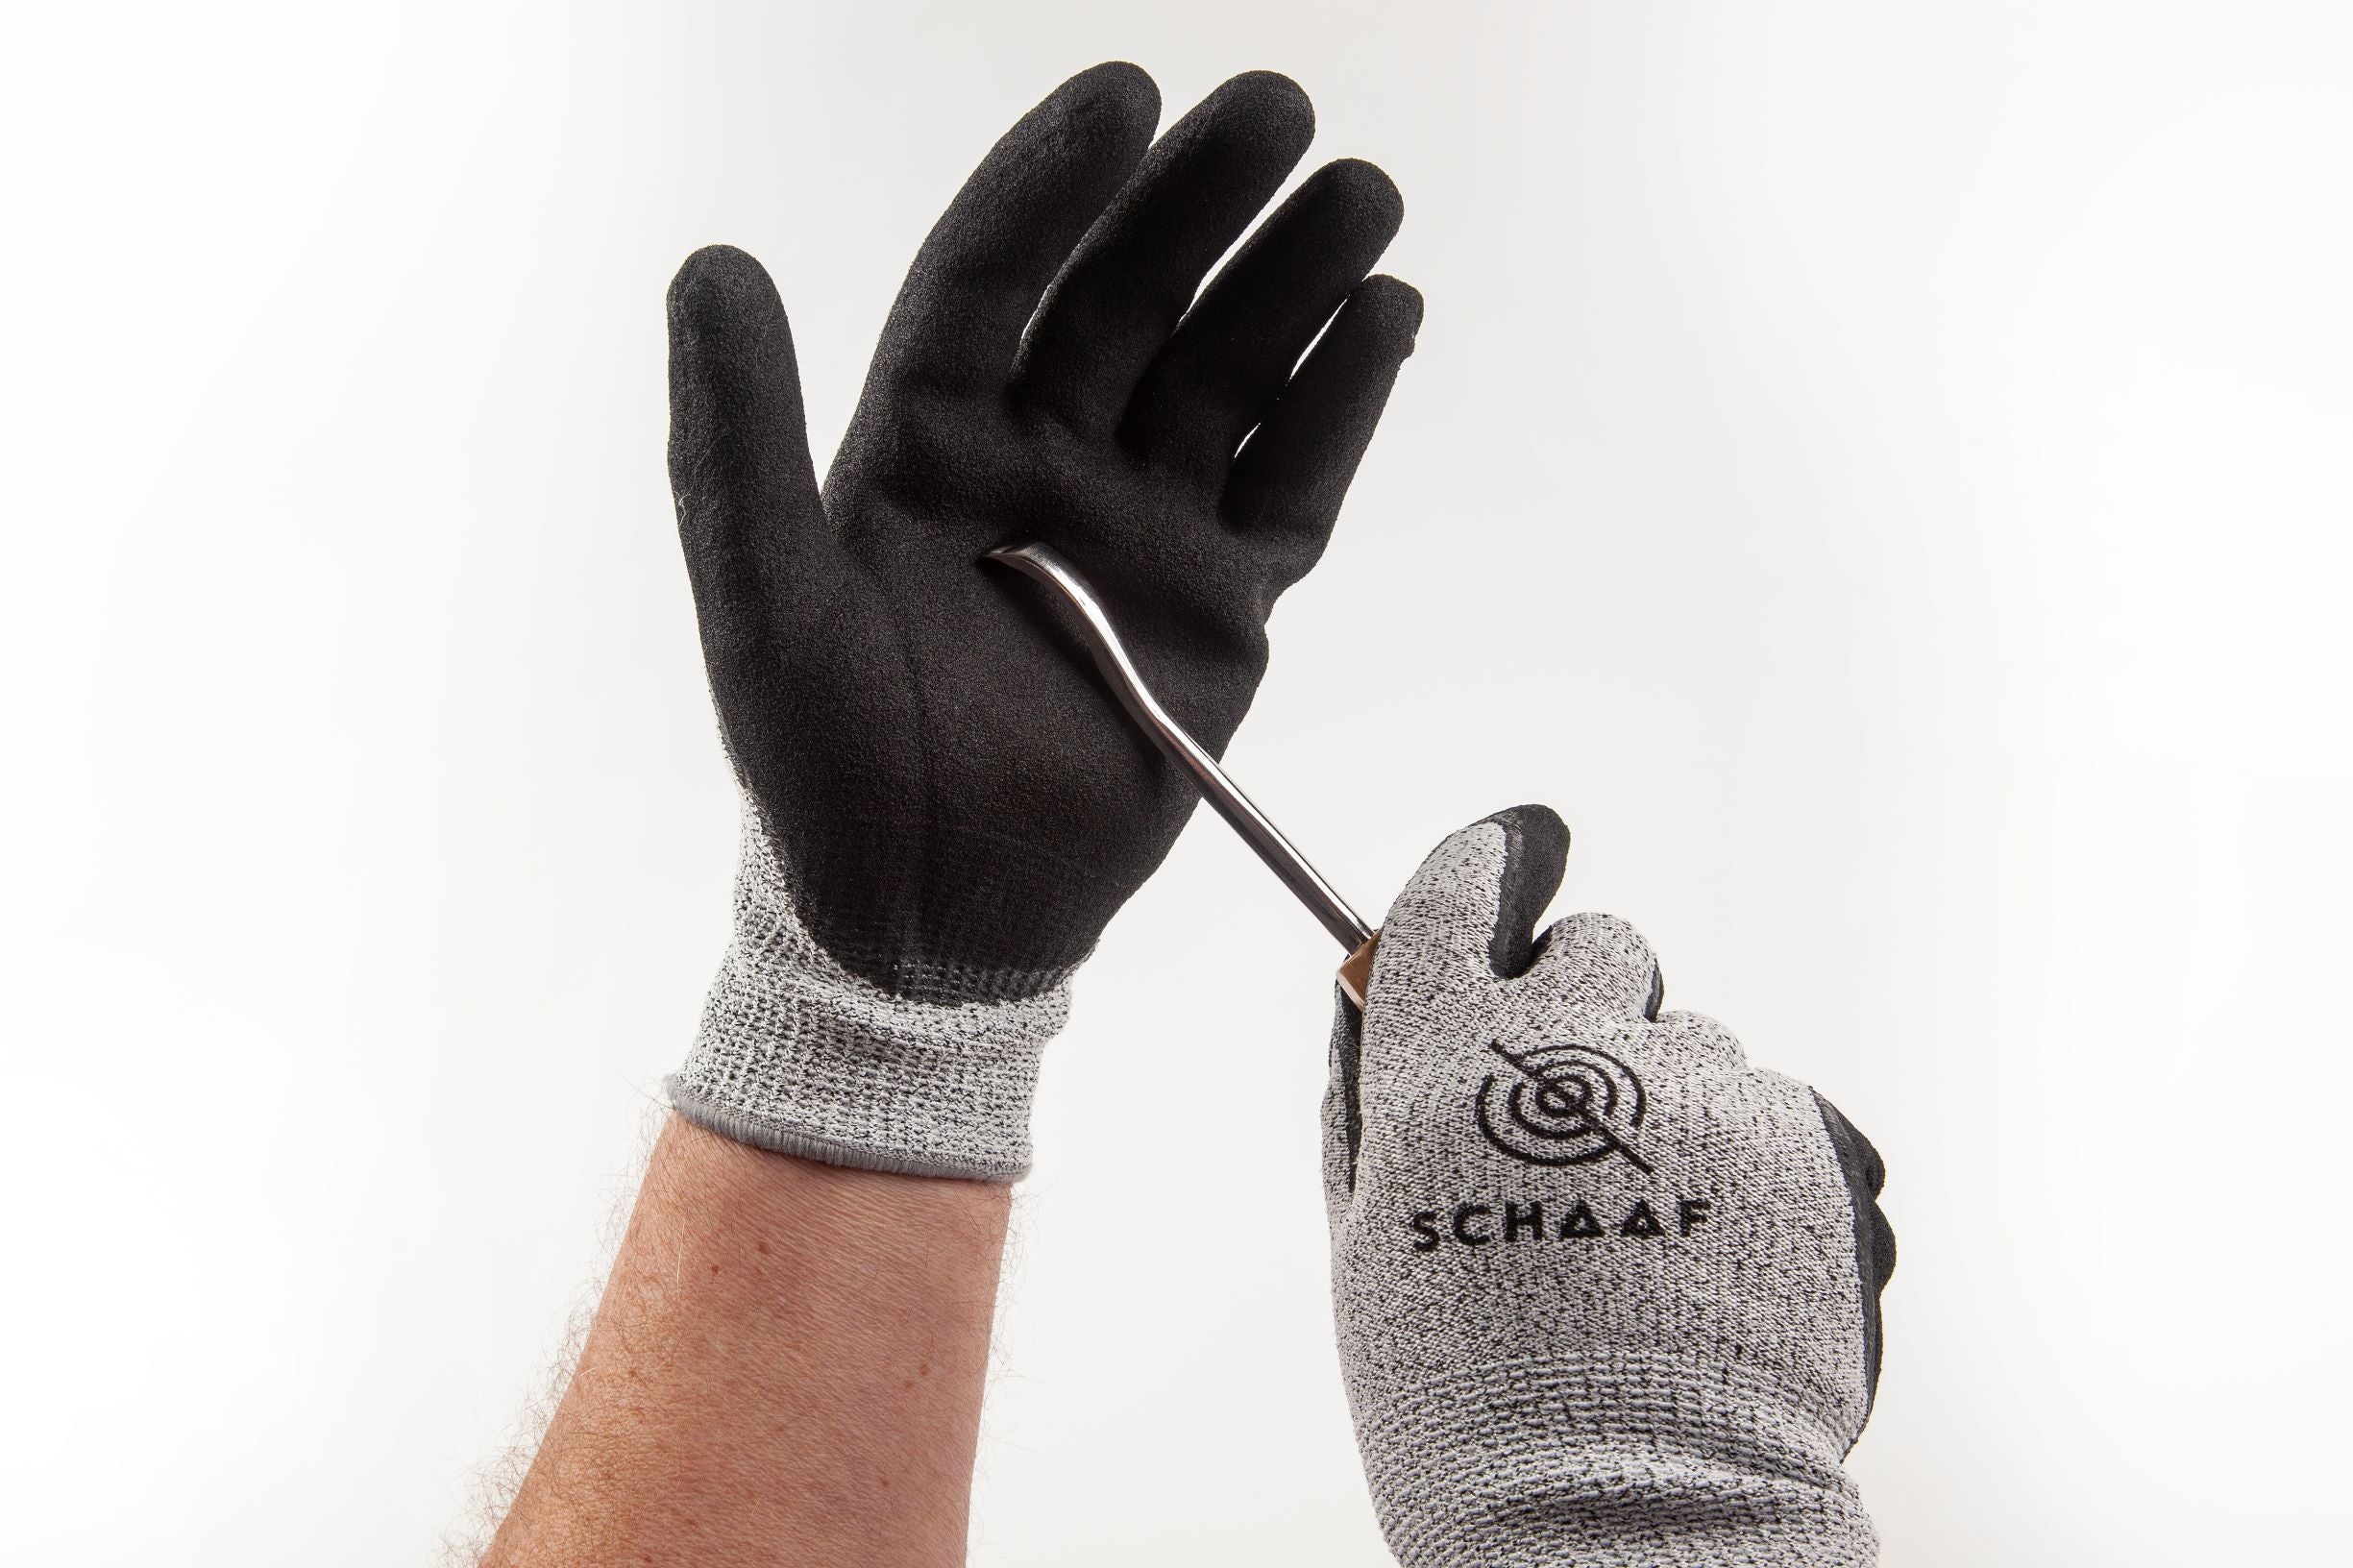 High Performance Cut-Resistant Safety Gloves